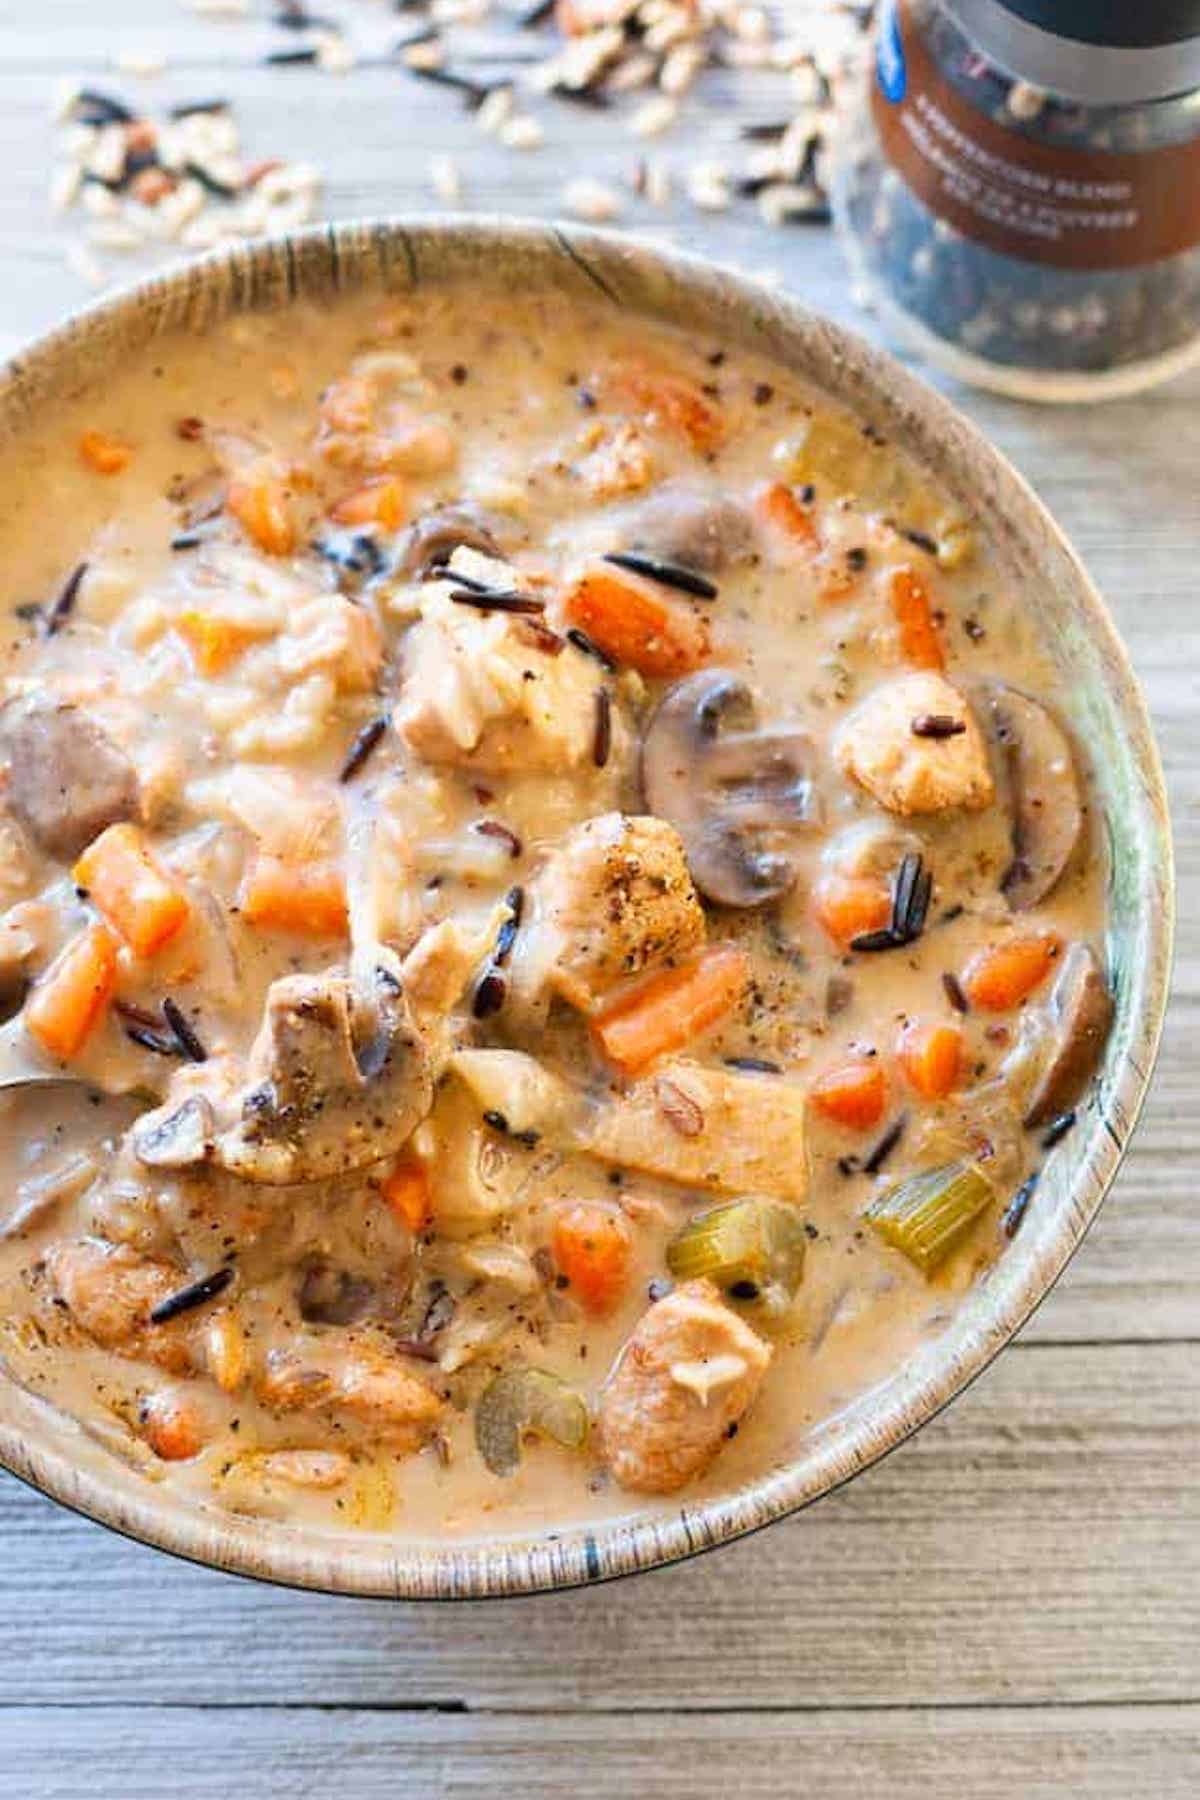 A bowl filled with cream chicken and wild rice soup with sliced mushrooms, celery, and carrots.